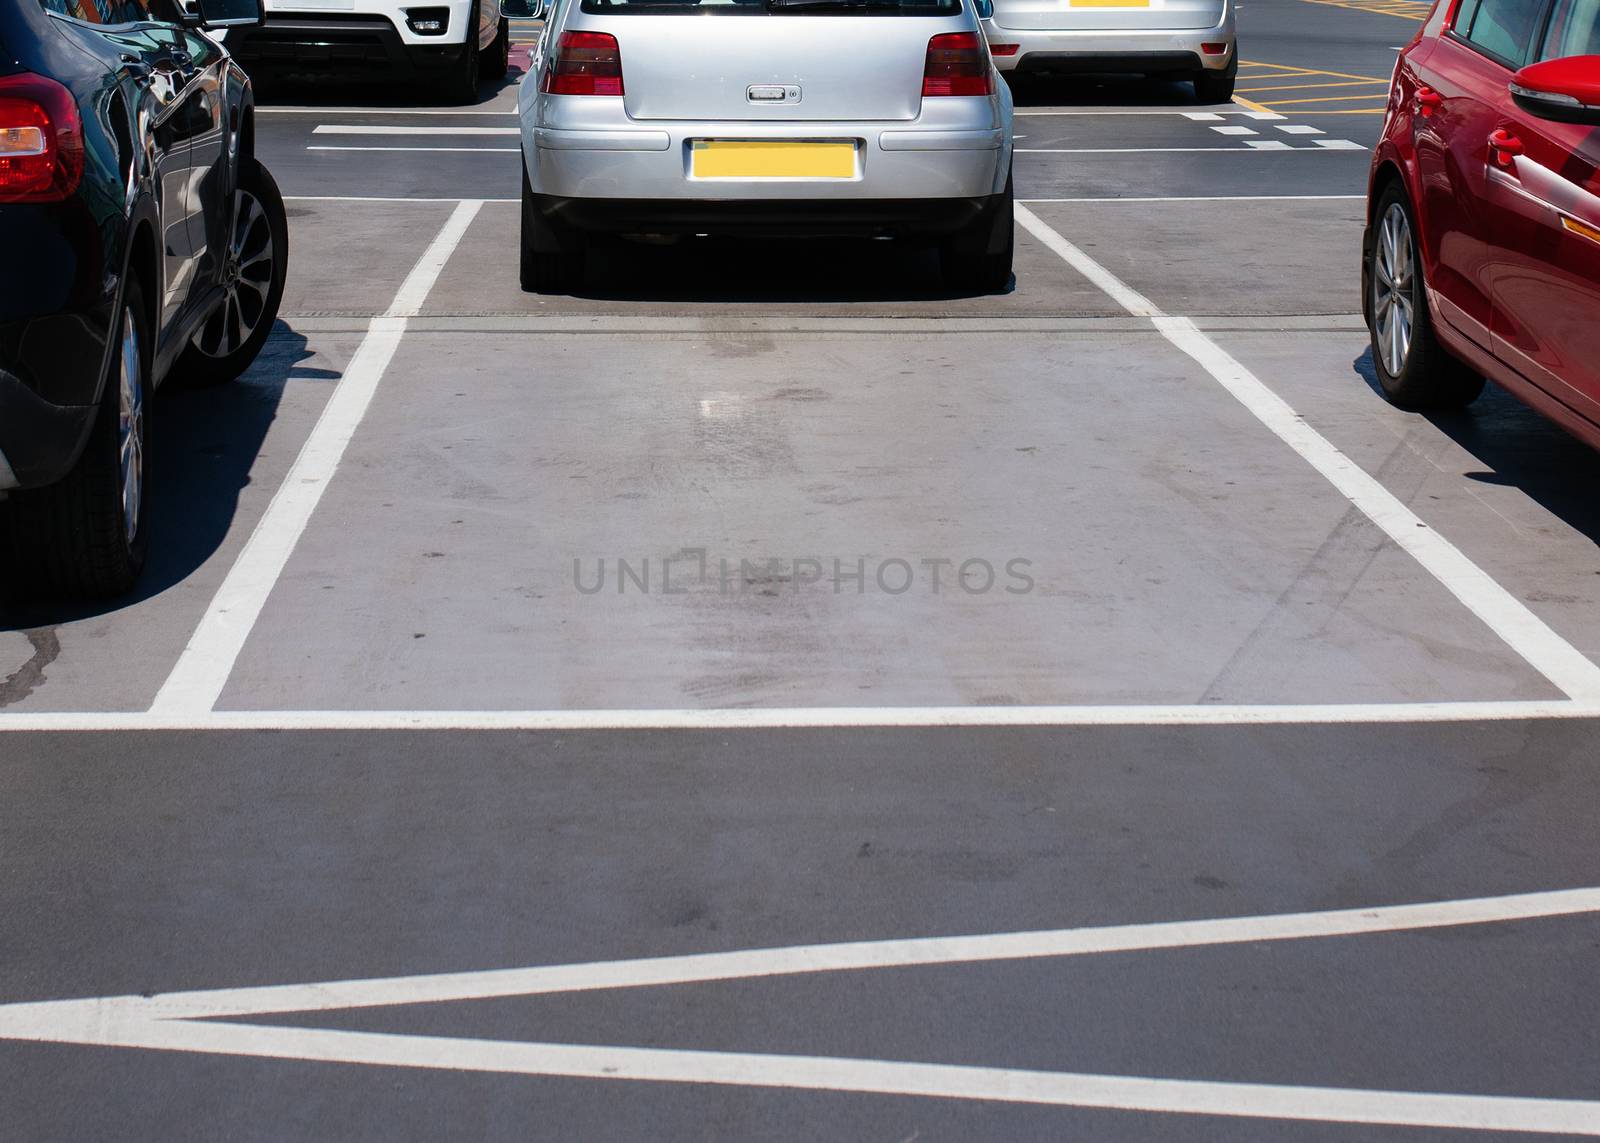 The free parking space in the Parking